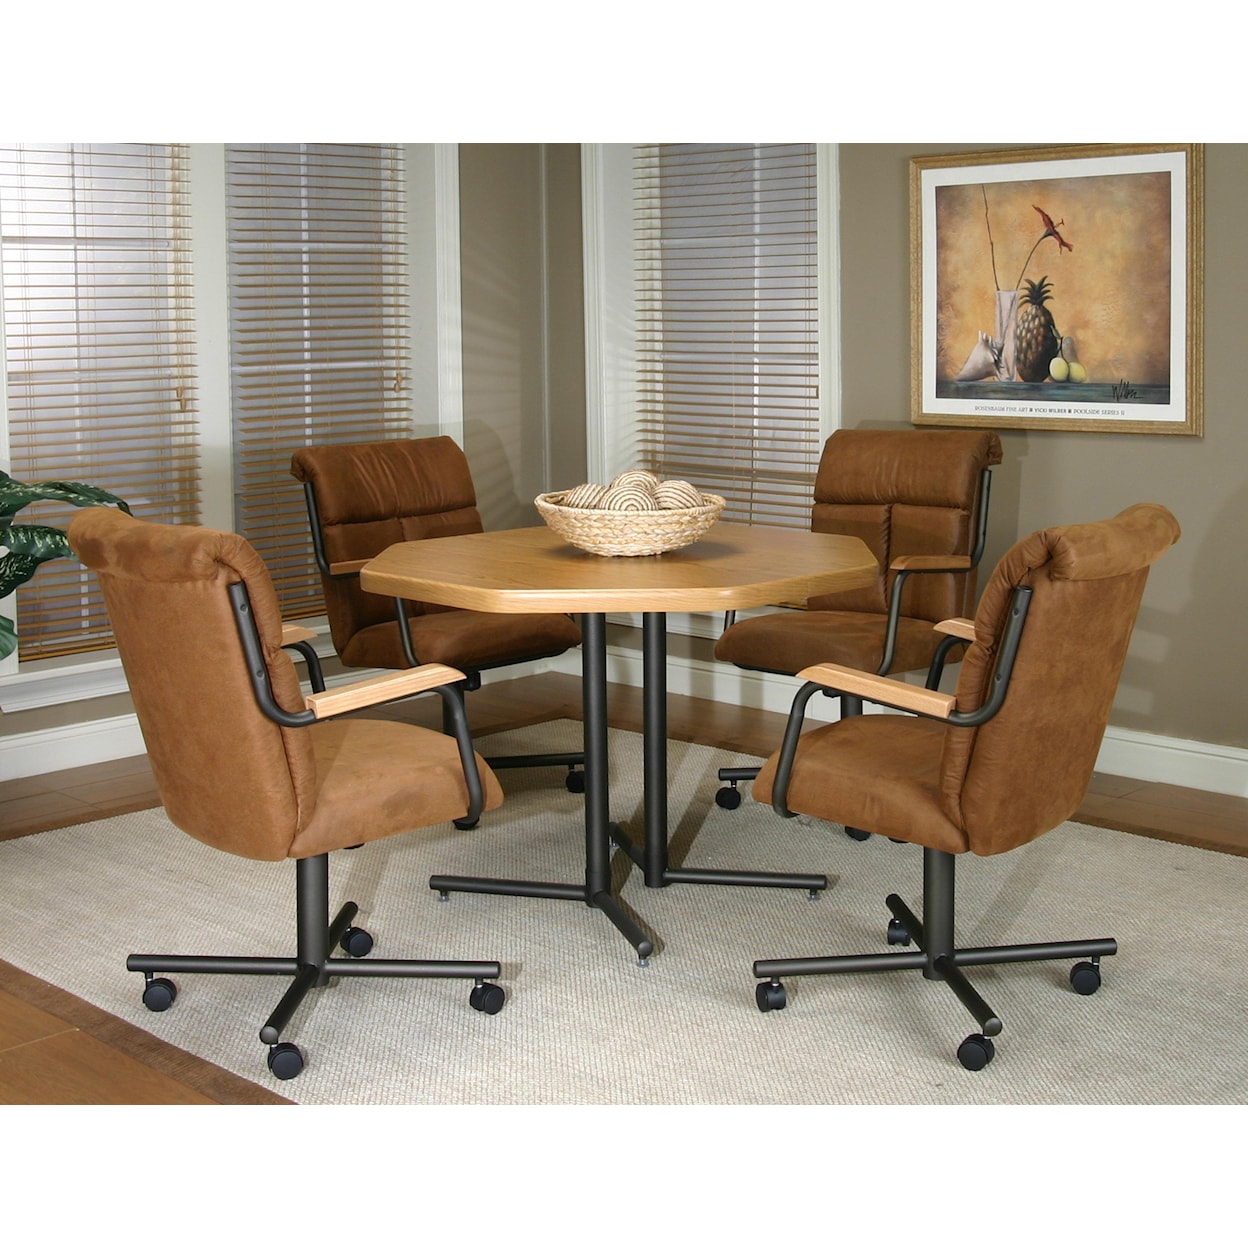 Cramco, Inc Landon Dining Chair with Casters